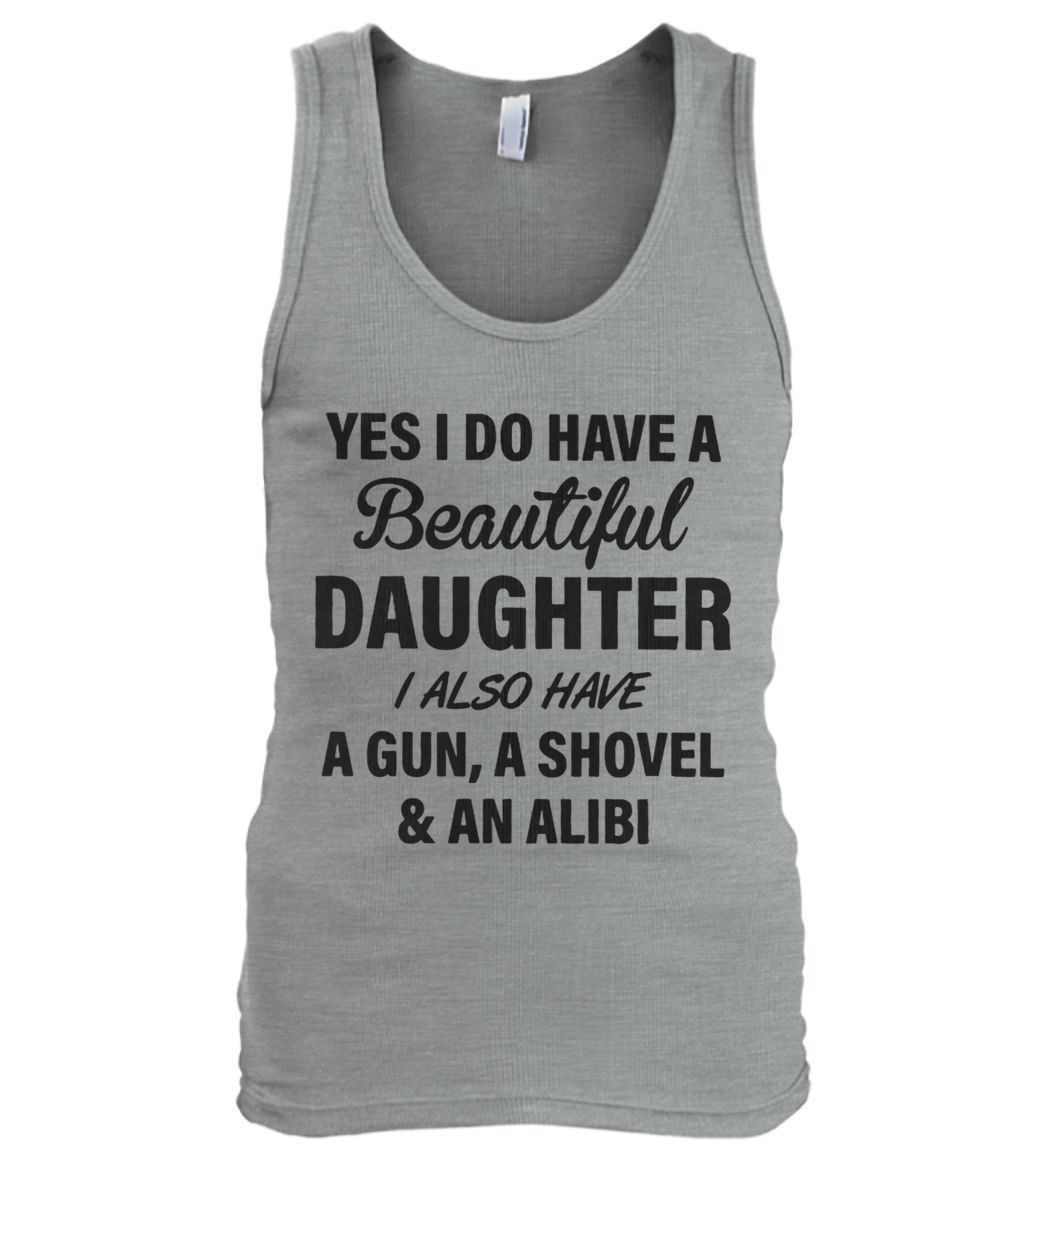 Yes I do have a beautiful daughter I also have a gun a shovel and an alibi men's tank top